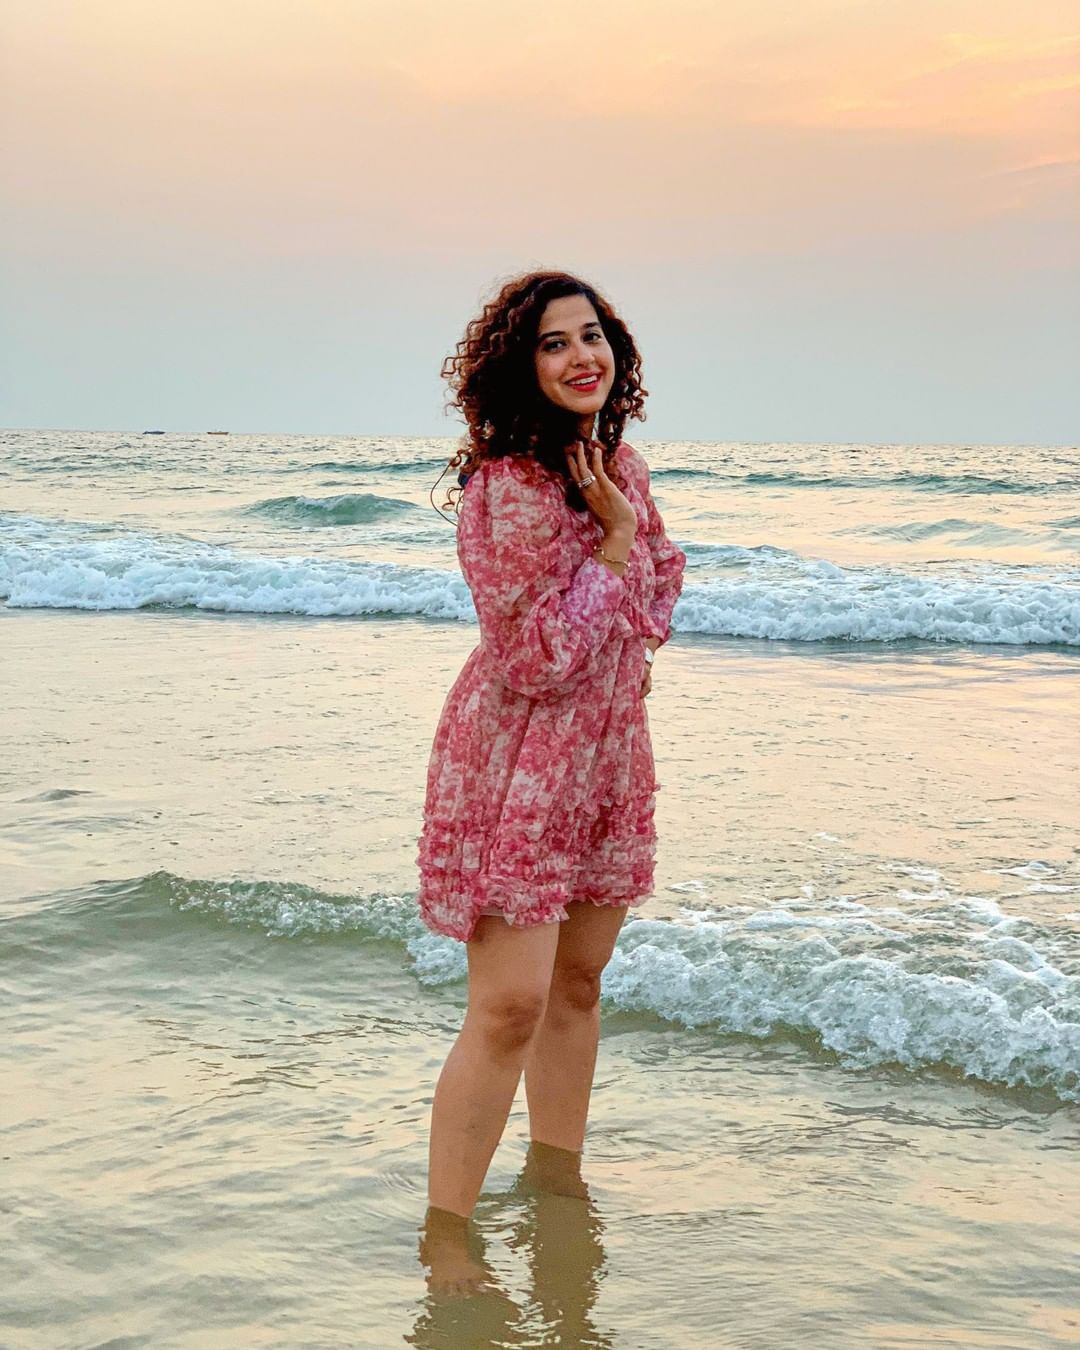 5 Best Beach Towns In India For A Solo Traveller